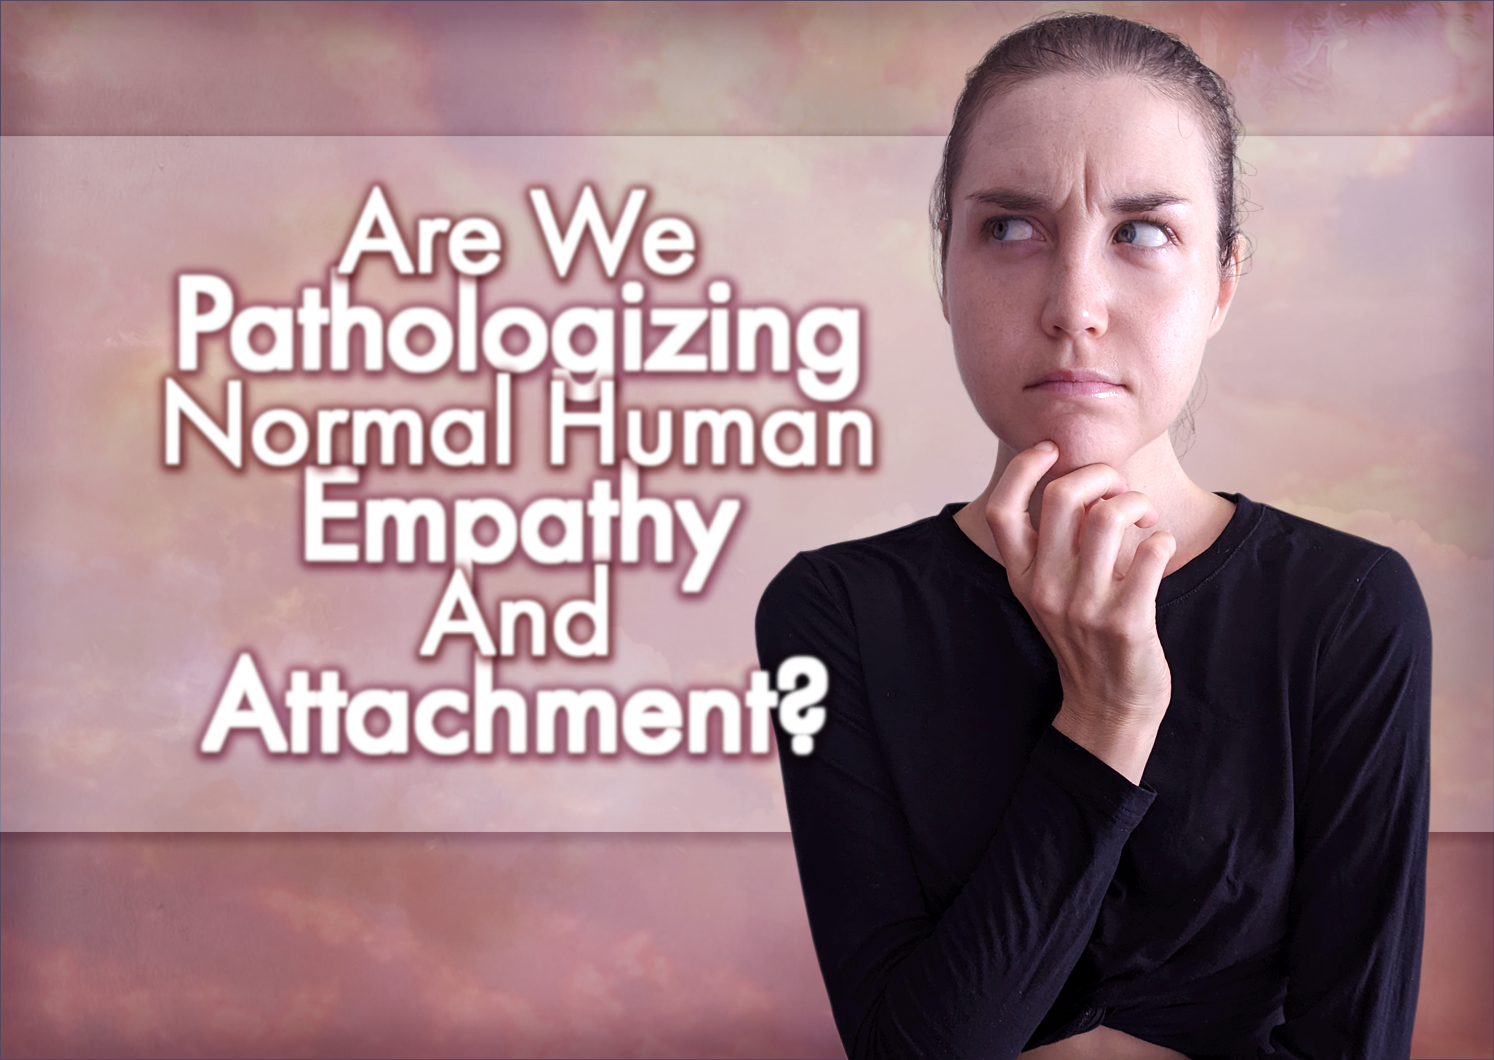 Are We Pathologizing Normal Human Empathy And Attachment?